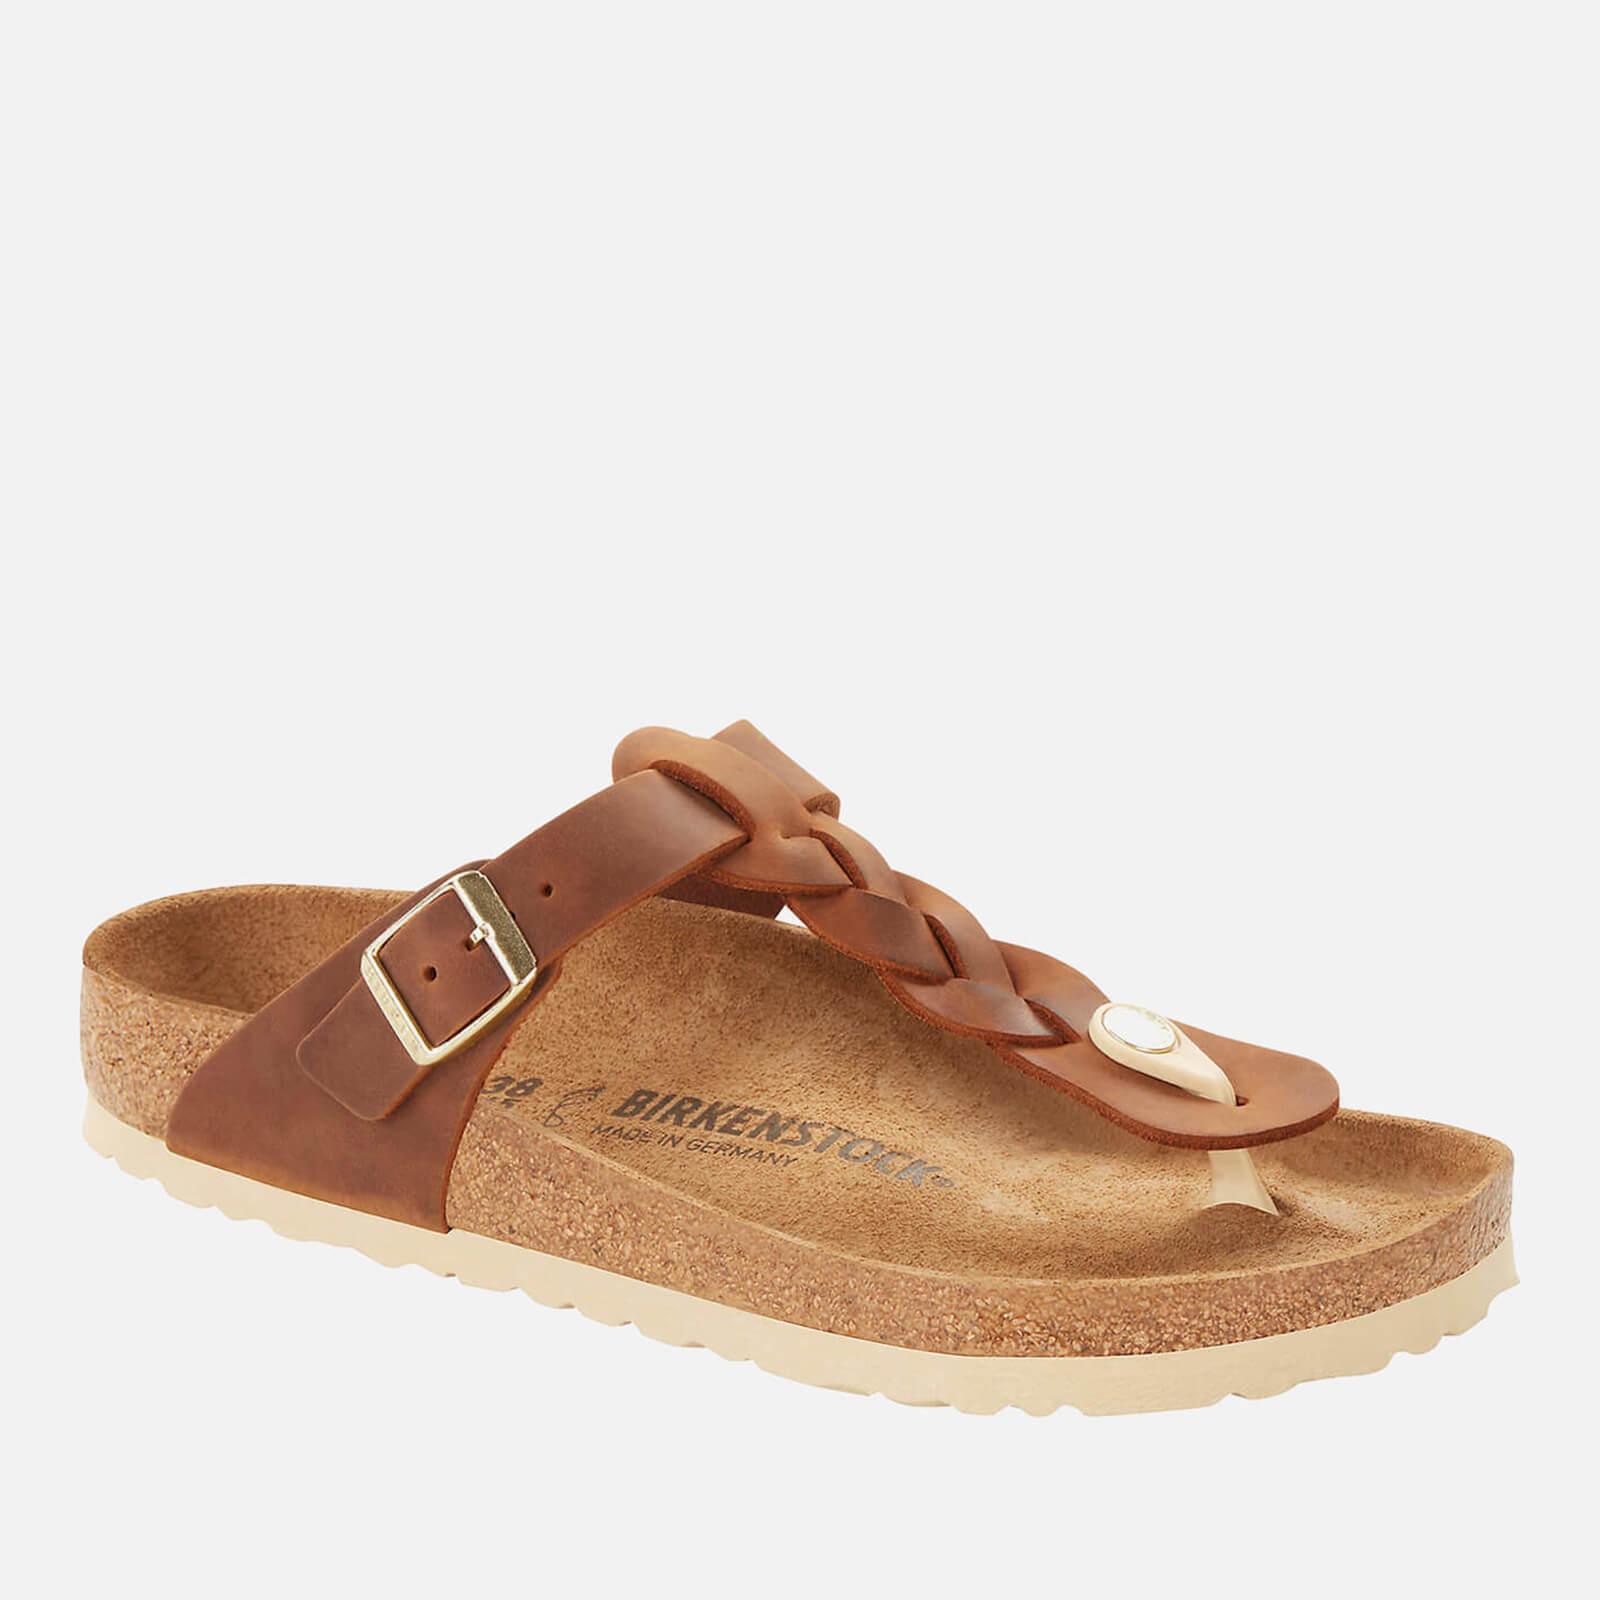 Birkenstock Gizeh Braided Oiled Leather Narrow Sandal in Brown | Lyst